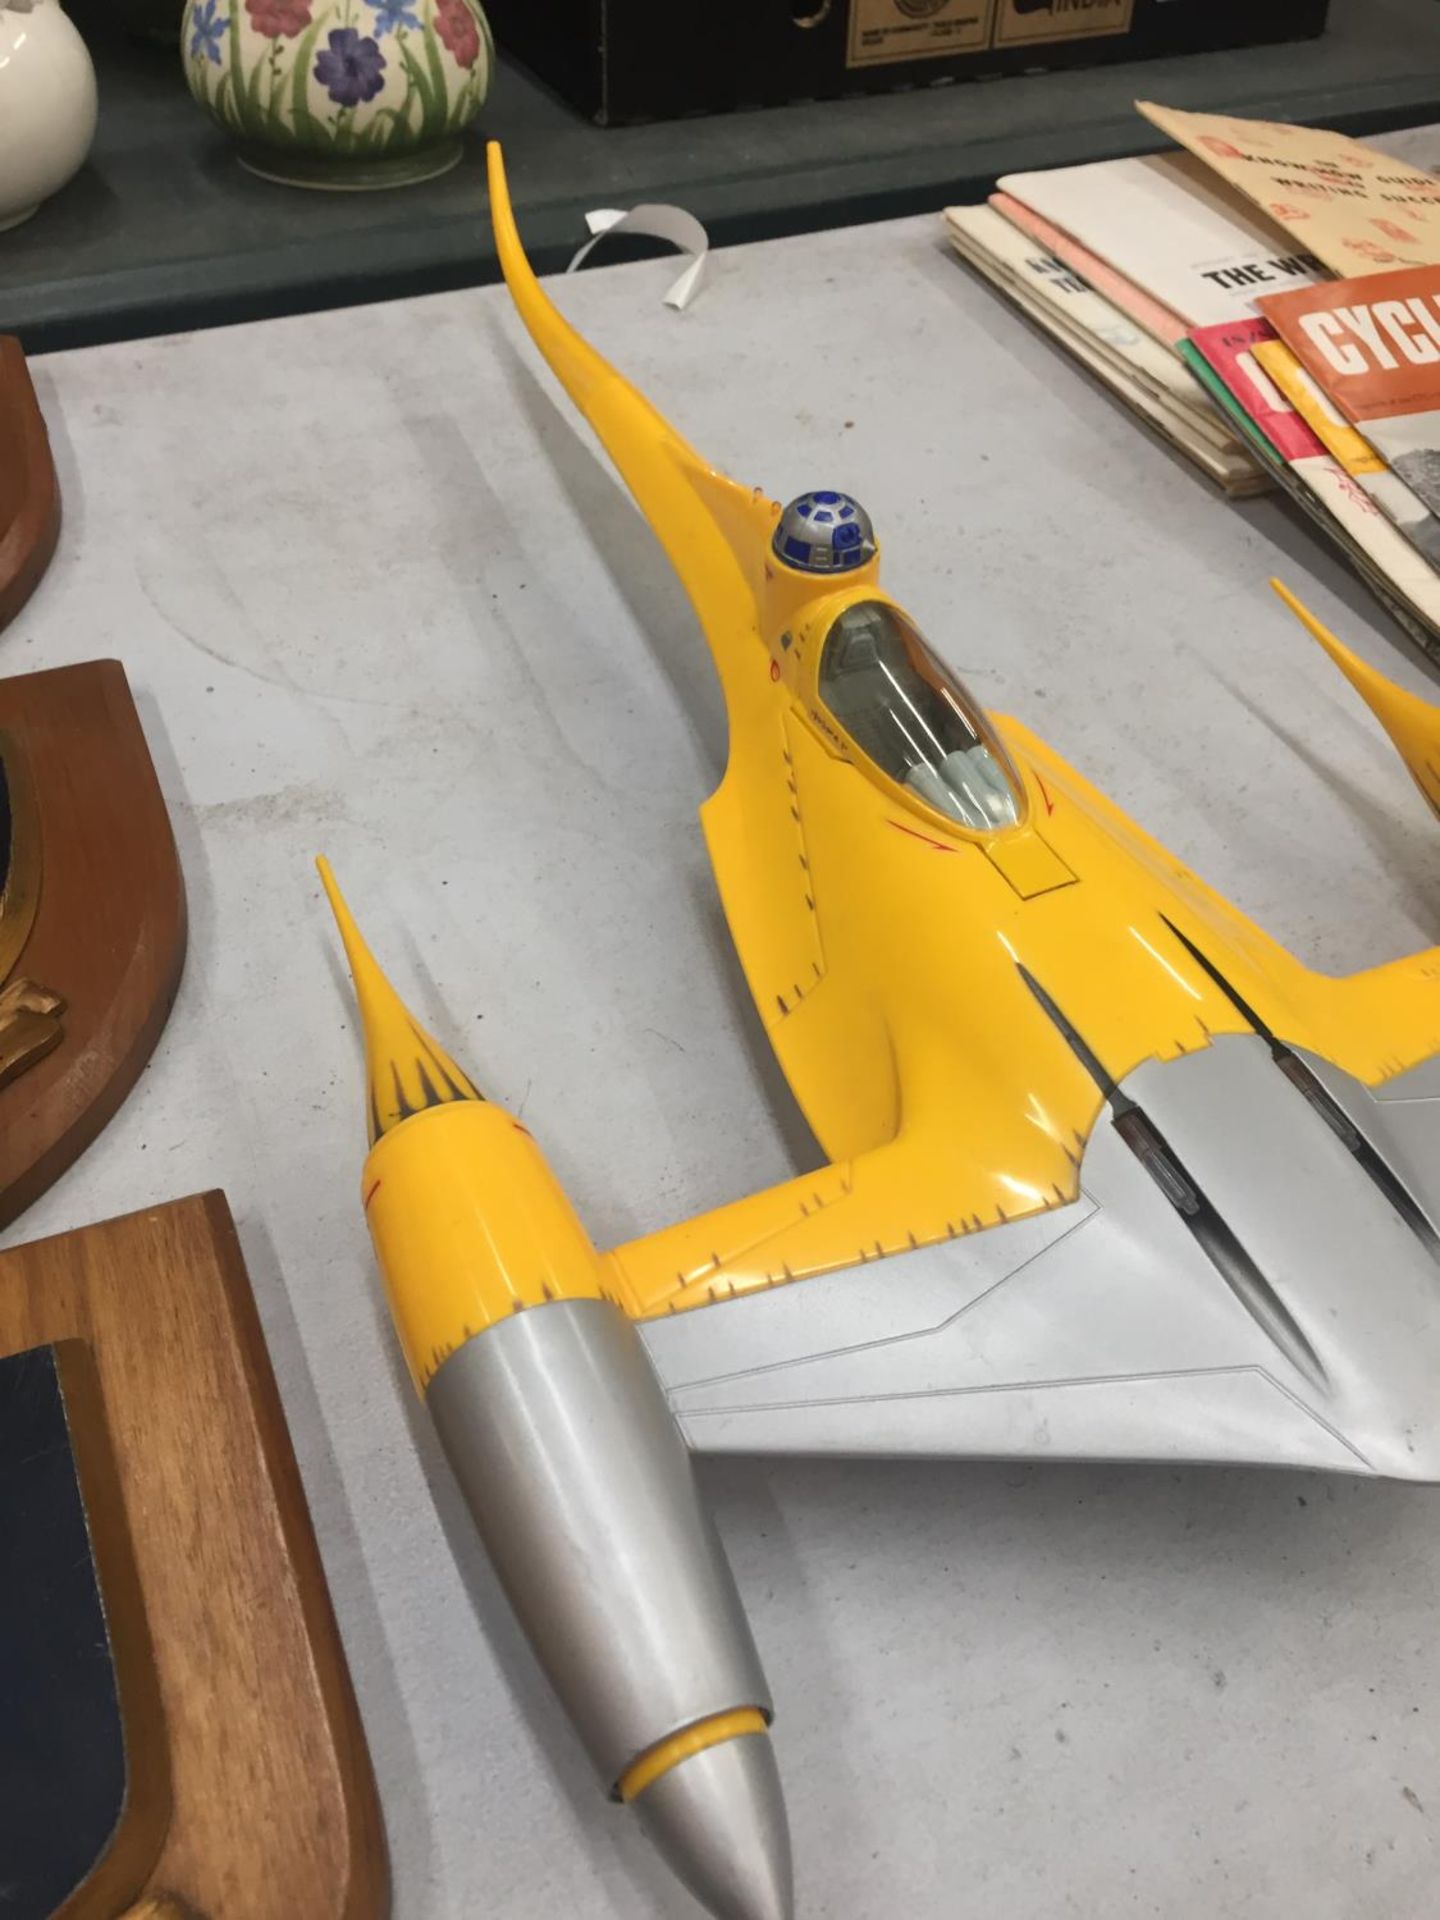 A STAR WARS ORIGINAL 1998 NABOO STAR FIGHTER SHIP - Image 2 of 3